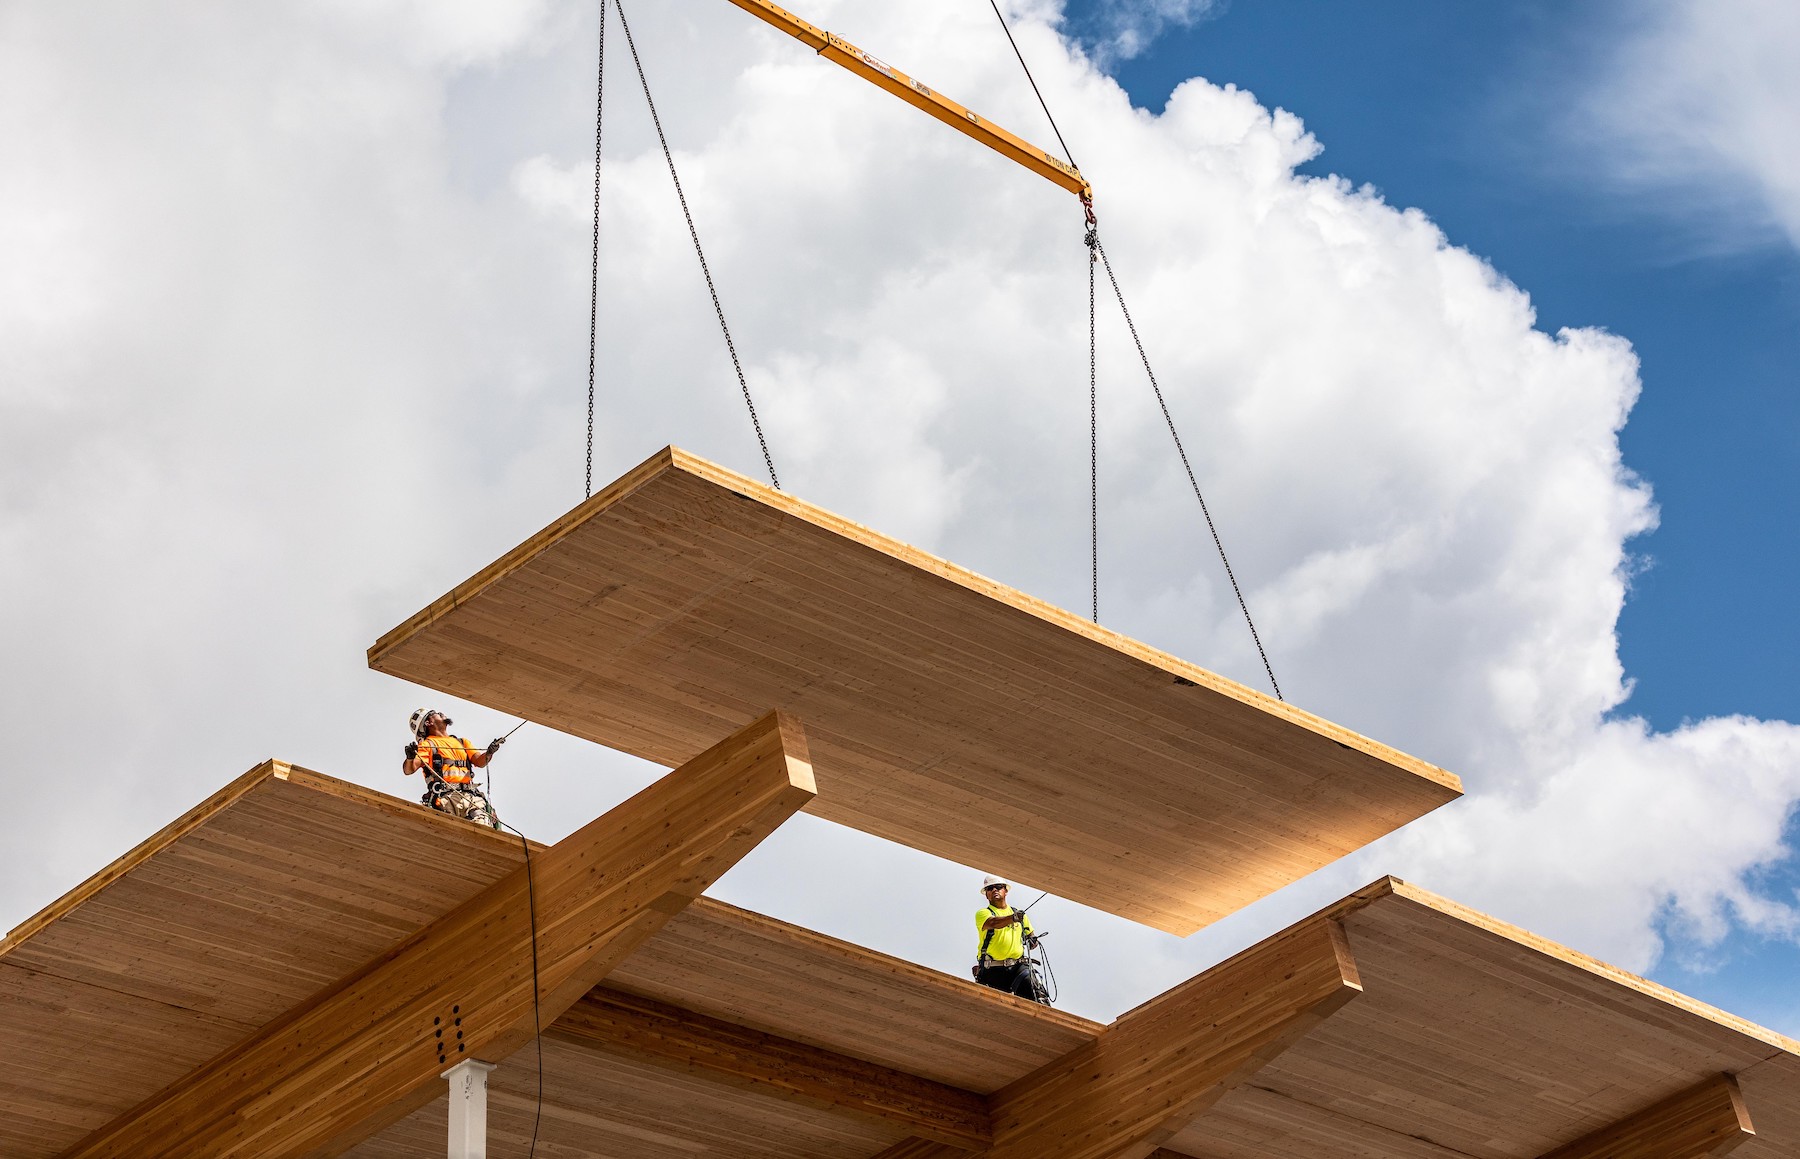 One of Swinerton's mass timber projects has been the Wingspan Conference & Event Center in Hillsboro, Ore. Images: Swinerton